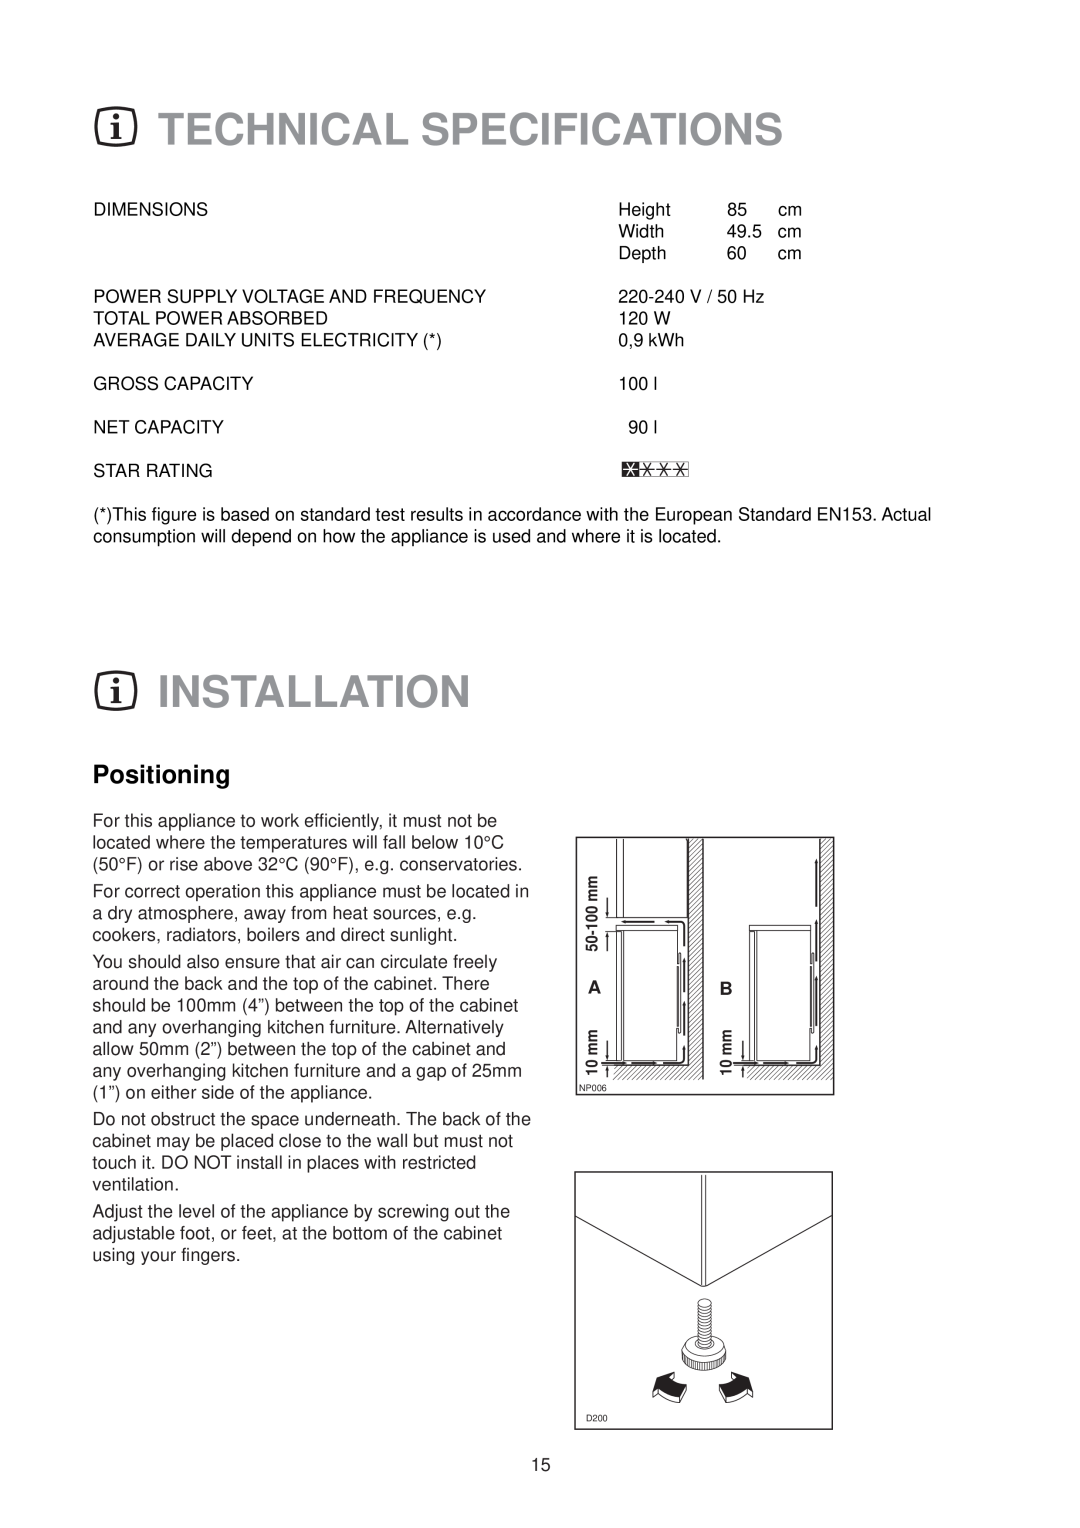 Zanussi ZV 41 R manual Technical Specifications, Installation, Positioning 